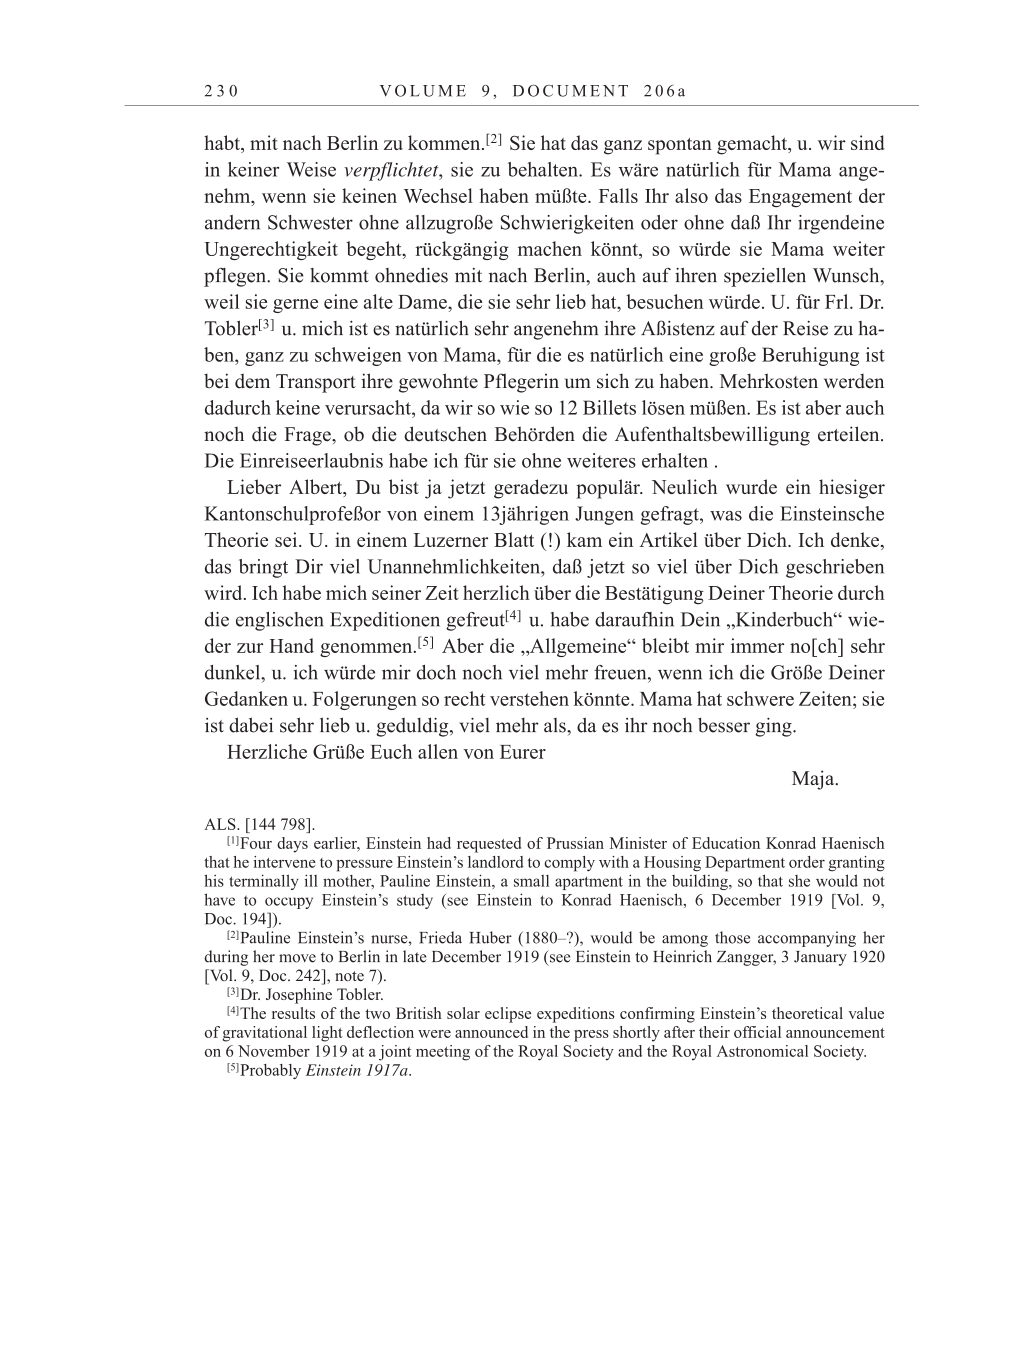 Volume 10: The Berlin Years: Correspondence May-December 1920 / Supplementary Correspondence 1909-1920 page 230